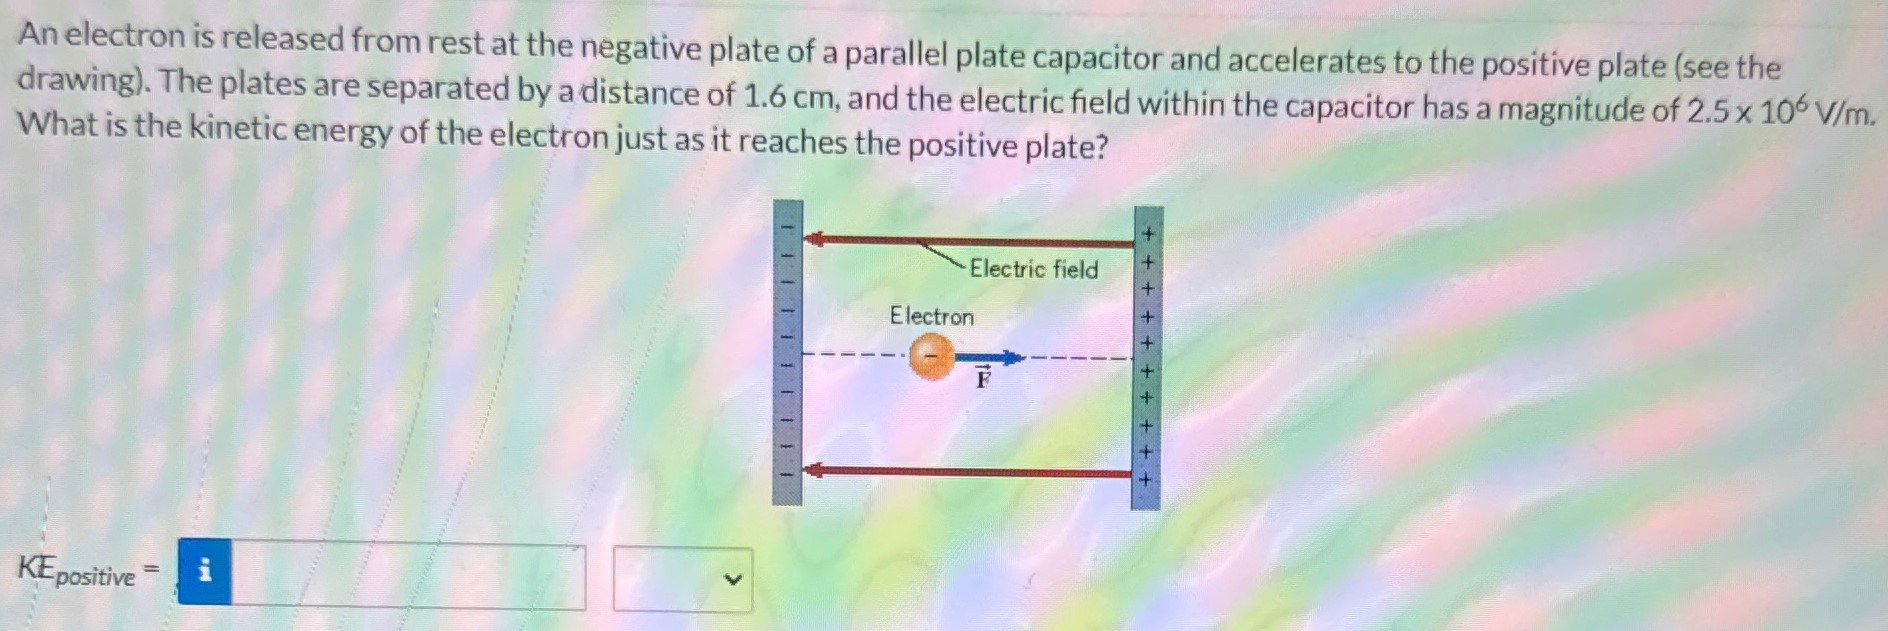 An electron is released from rest at the negative plate of a parallel plate capacitor and accelerates to the positive plate (see the drawing). The plates are separated by a distance of 1.6 cm, and the electric field within the capacitor has a magnitude of 2.5×106 V/m. What is the kinetic energy of the electron just as it reaches the positive plate? KEpositive